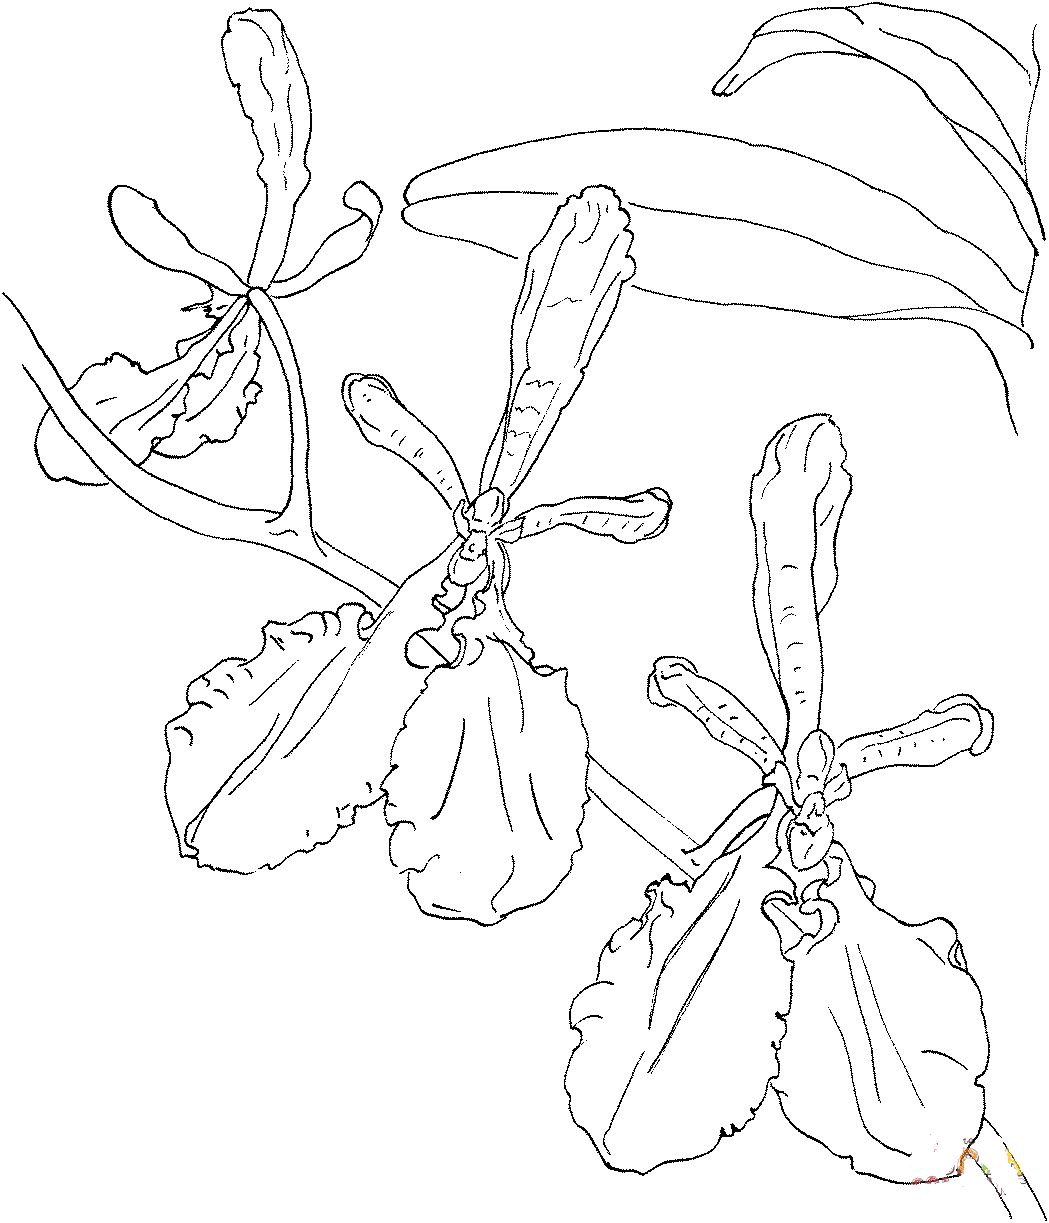 renanthera-imschootiana-orchid-coloring-page Coloring Page